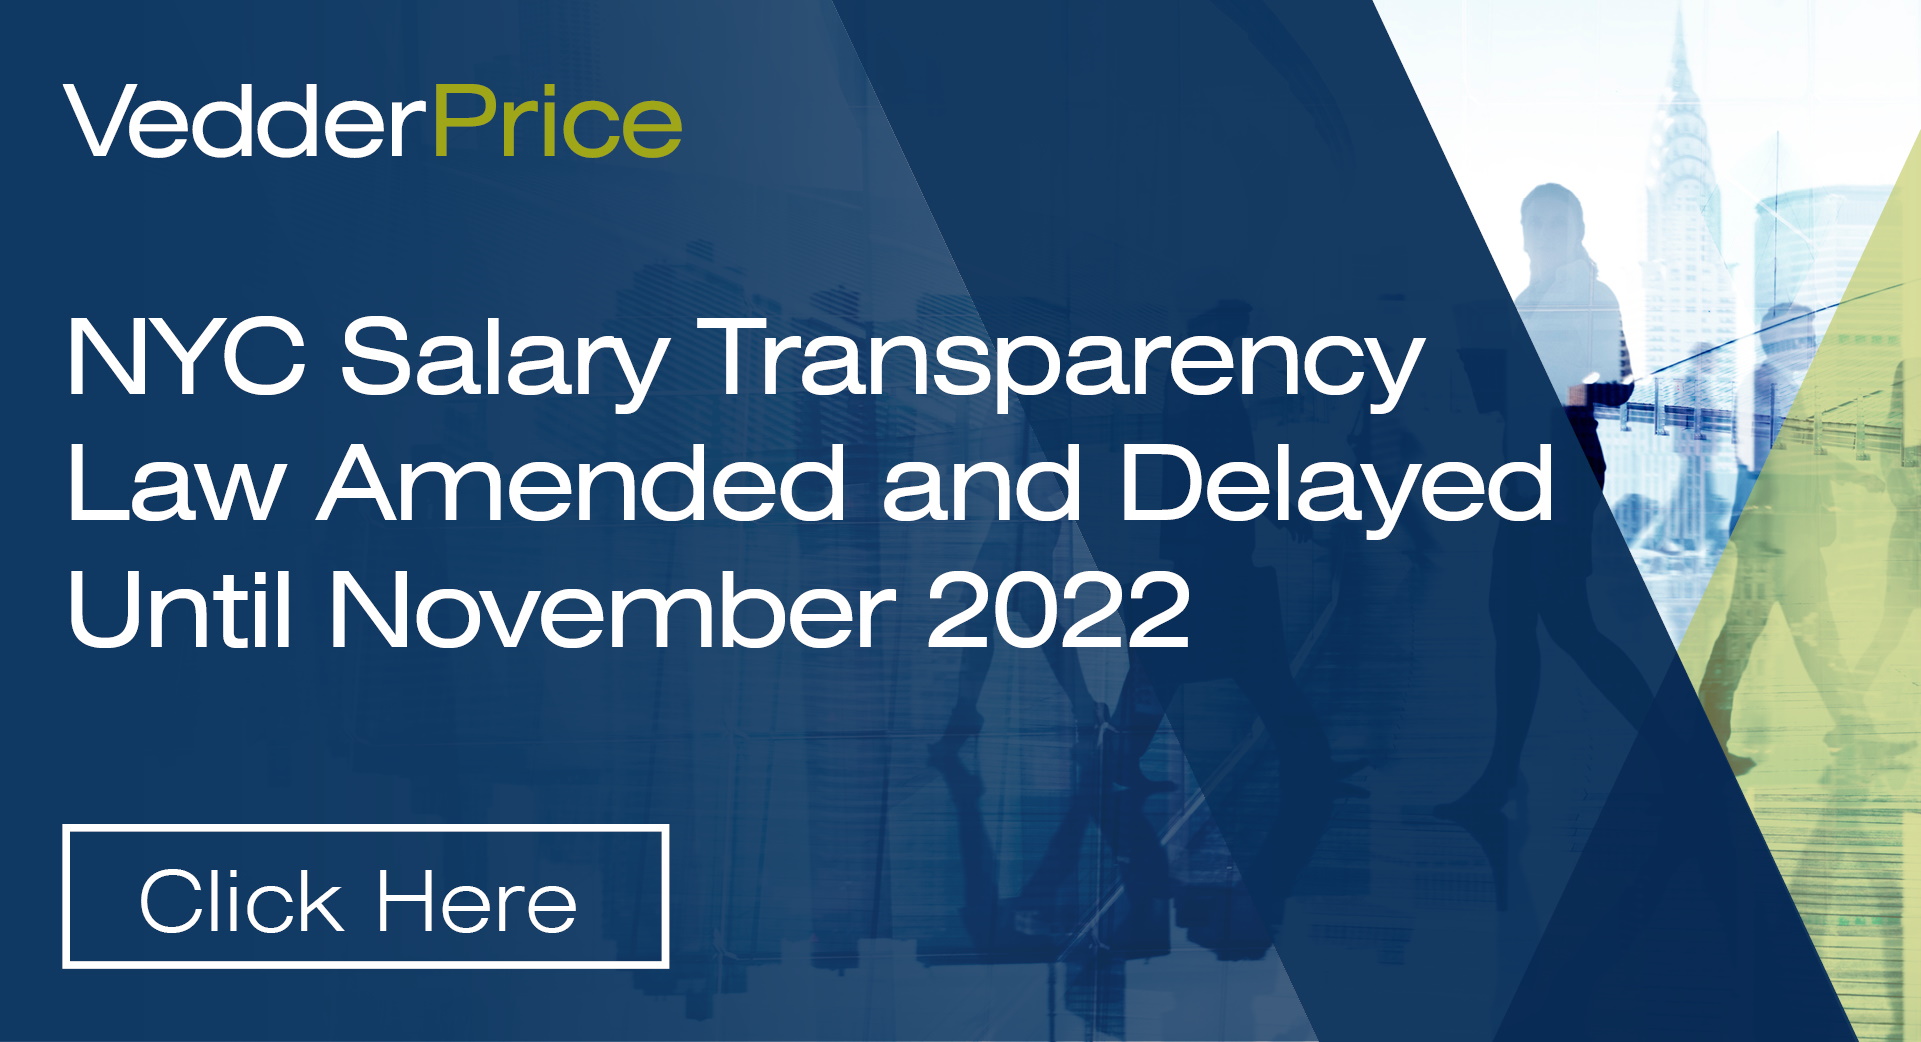 NYC Salary Transparency Law Amended and Delayed Until November 2022